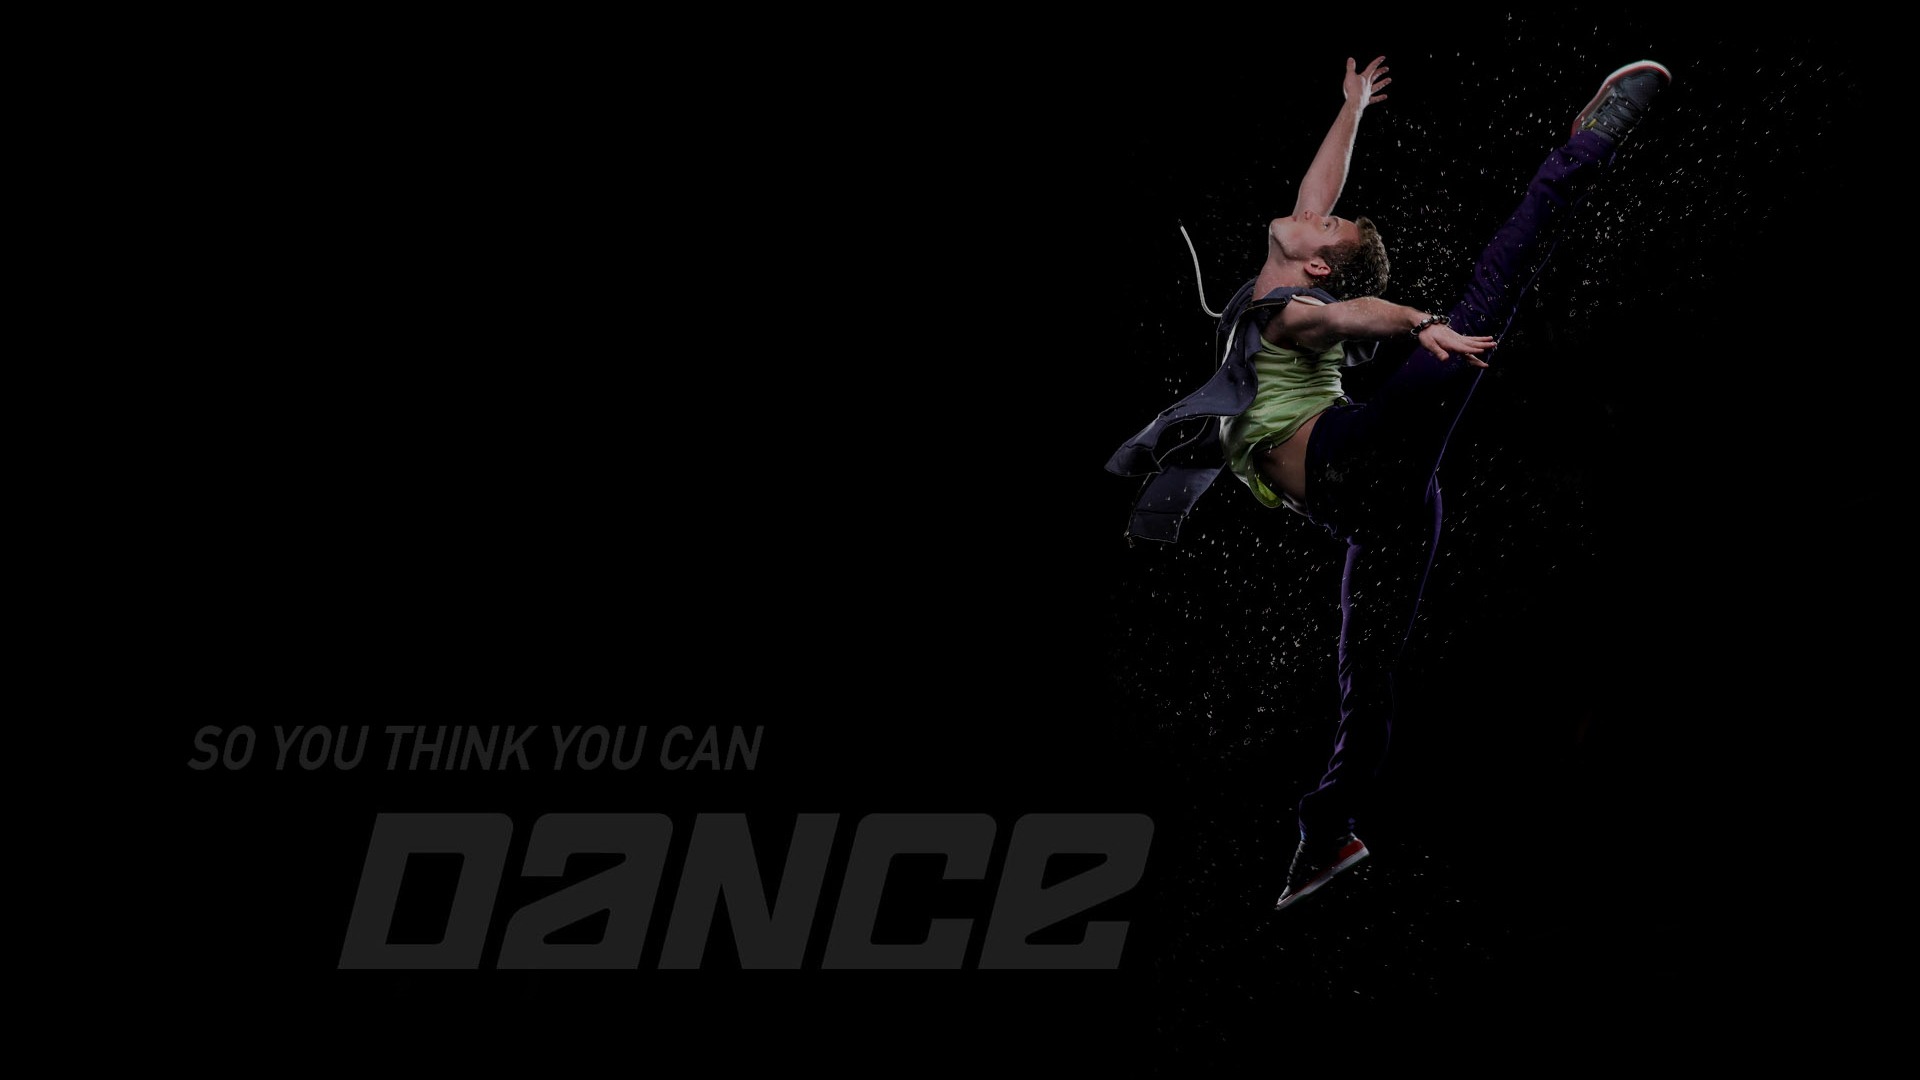 So You Think You Can Dance 舞林爭霸壁紙(二) #8 - 1920x1080